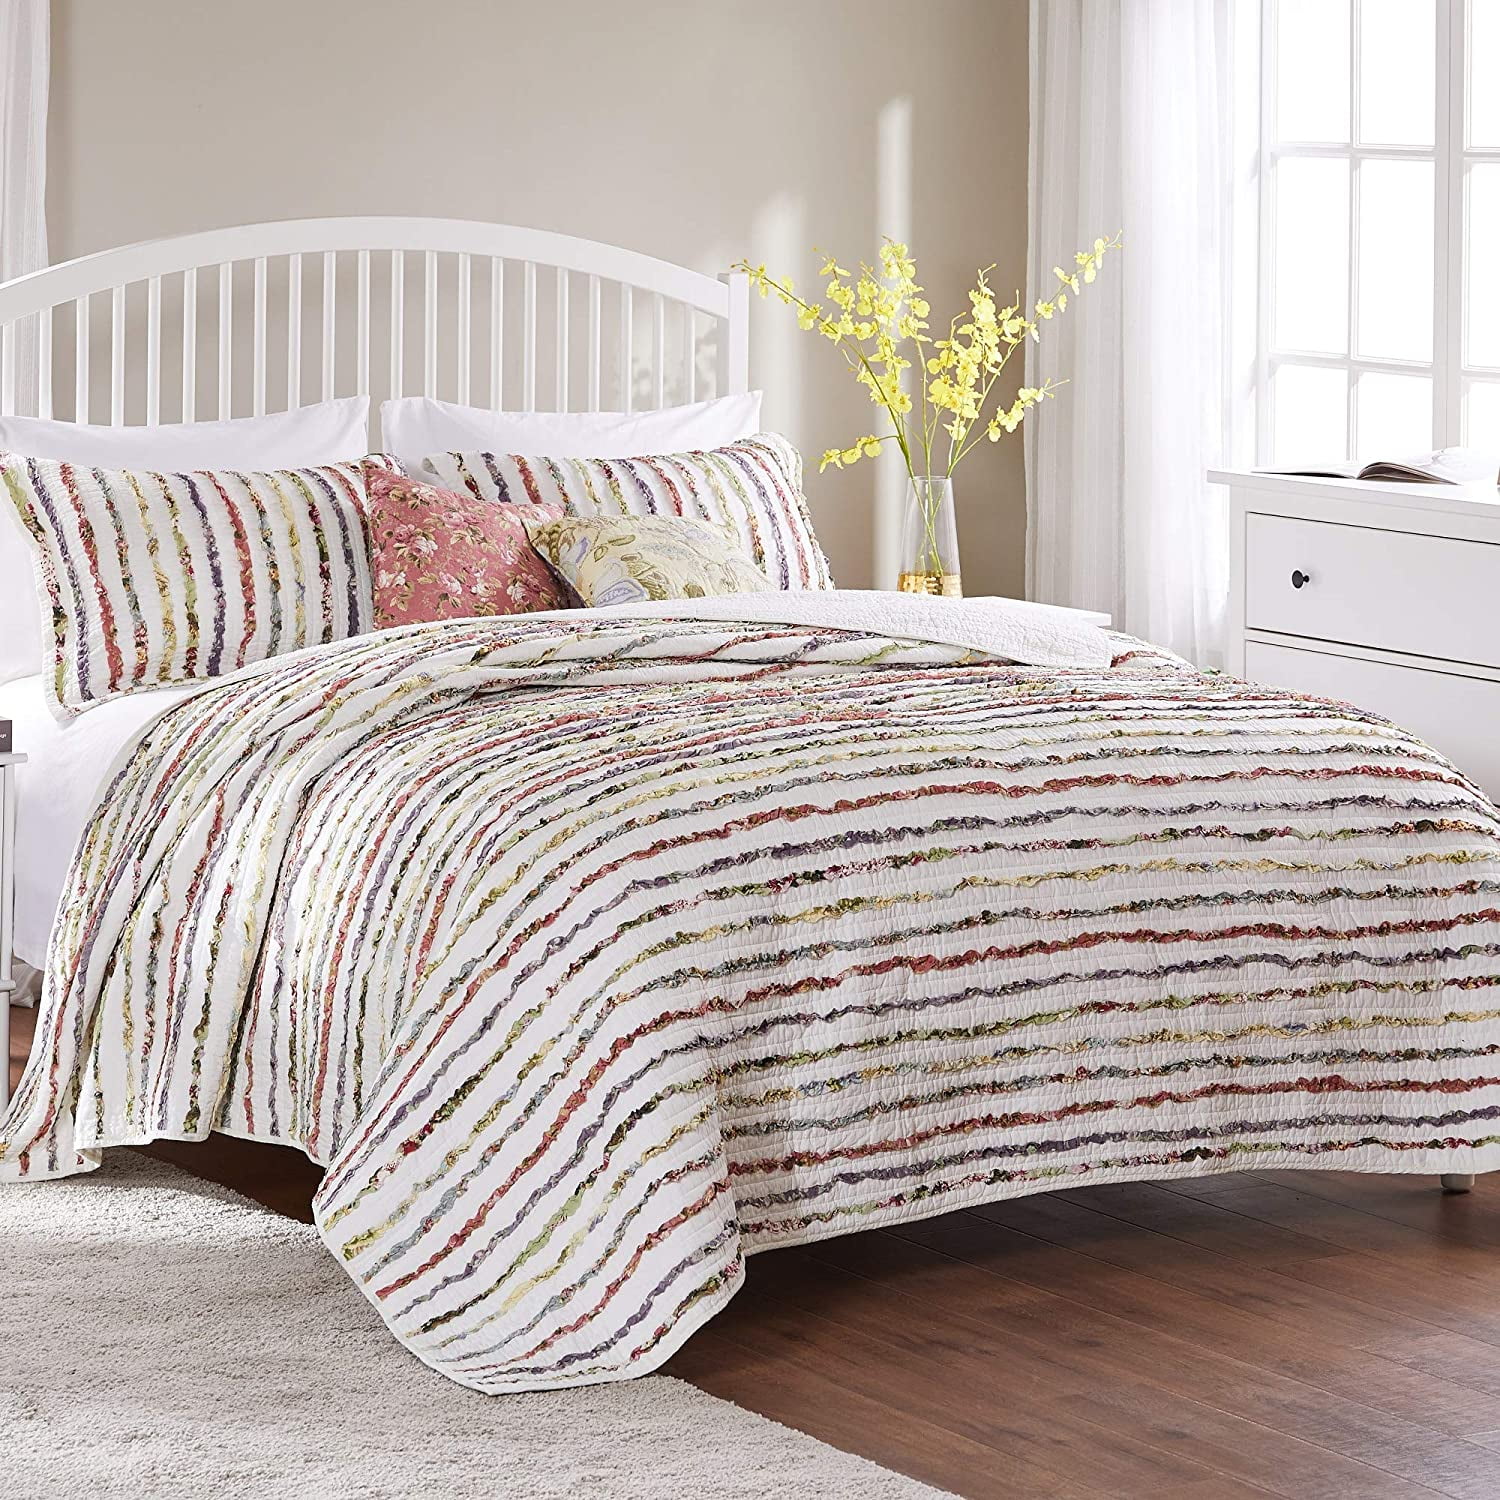 King for sale online Greenland Home Fashions 100 Cotton Oversized Ruffled Quilt Set in White 